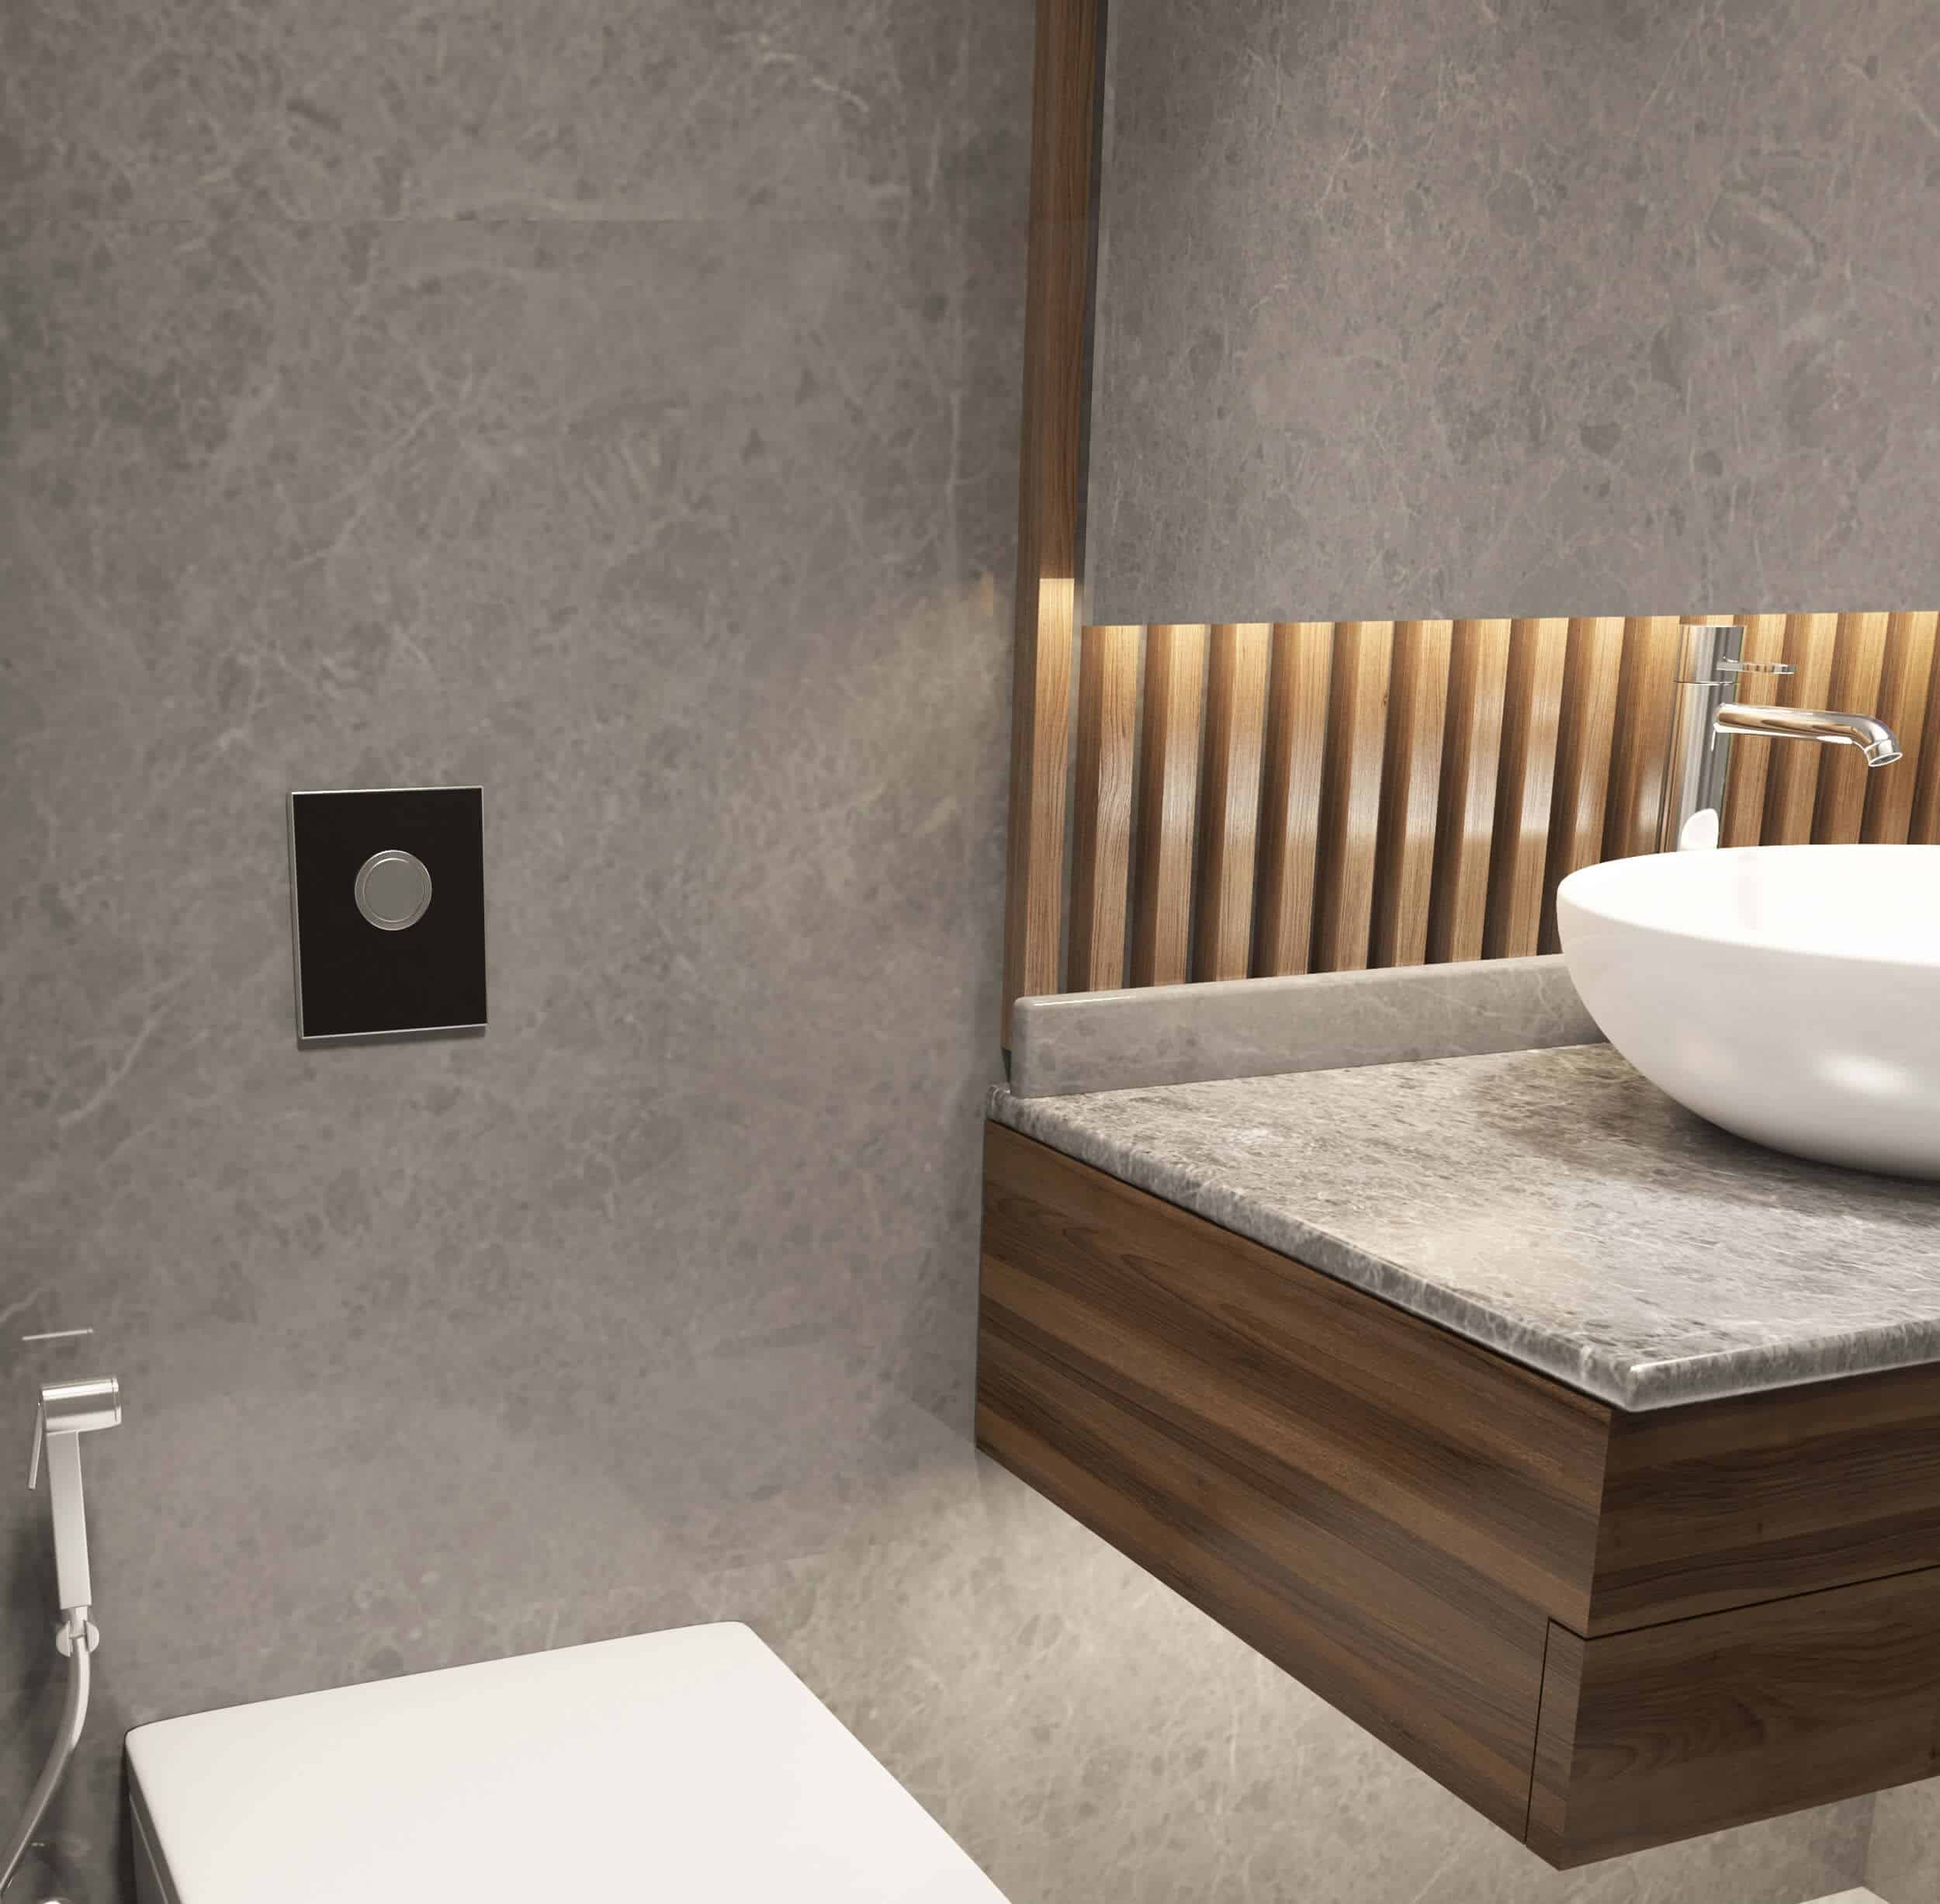 SCHELL concealed and exposed toilet fittings – The right choice for modern bathrooms